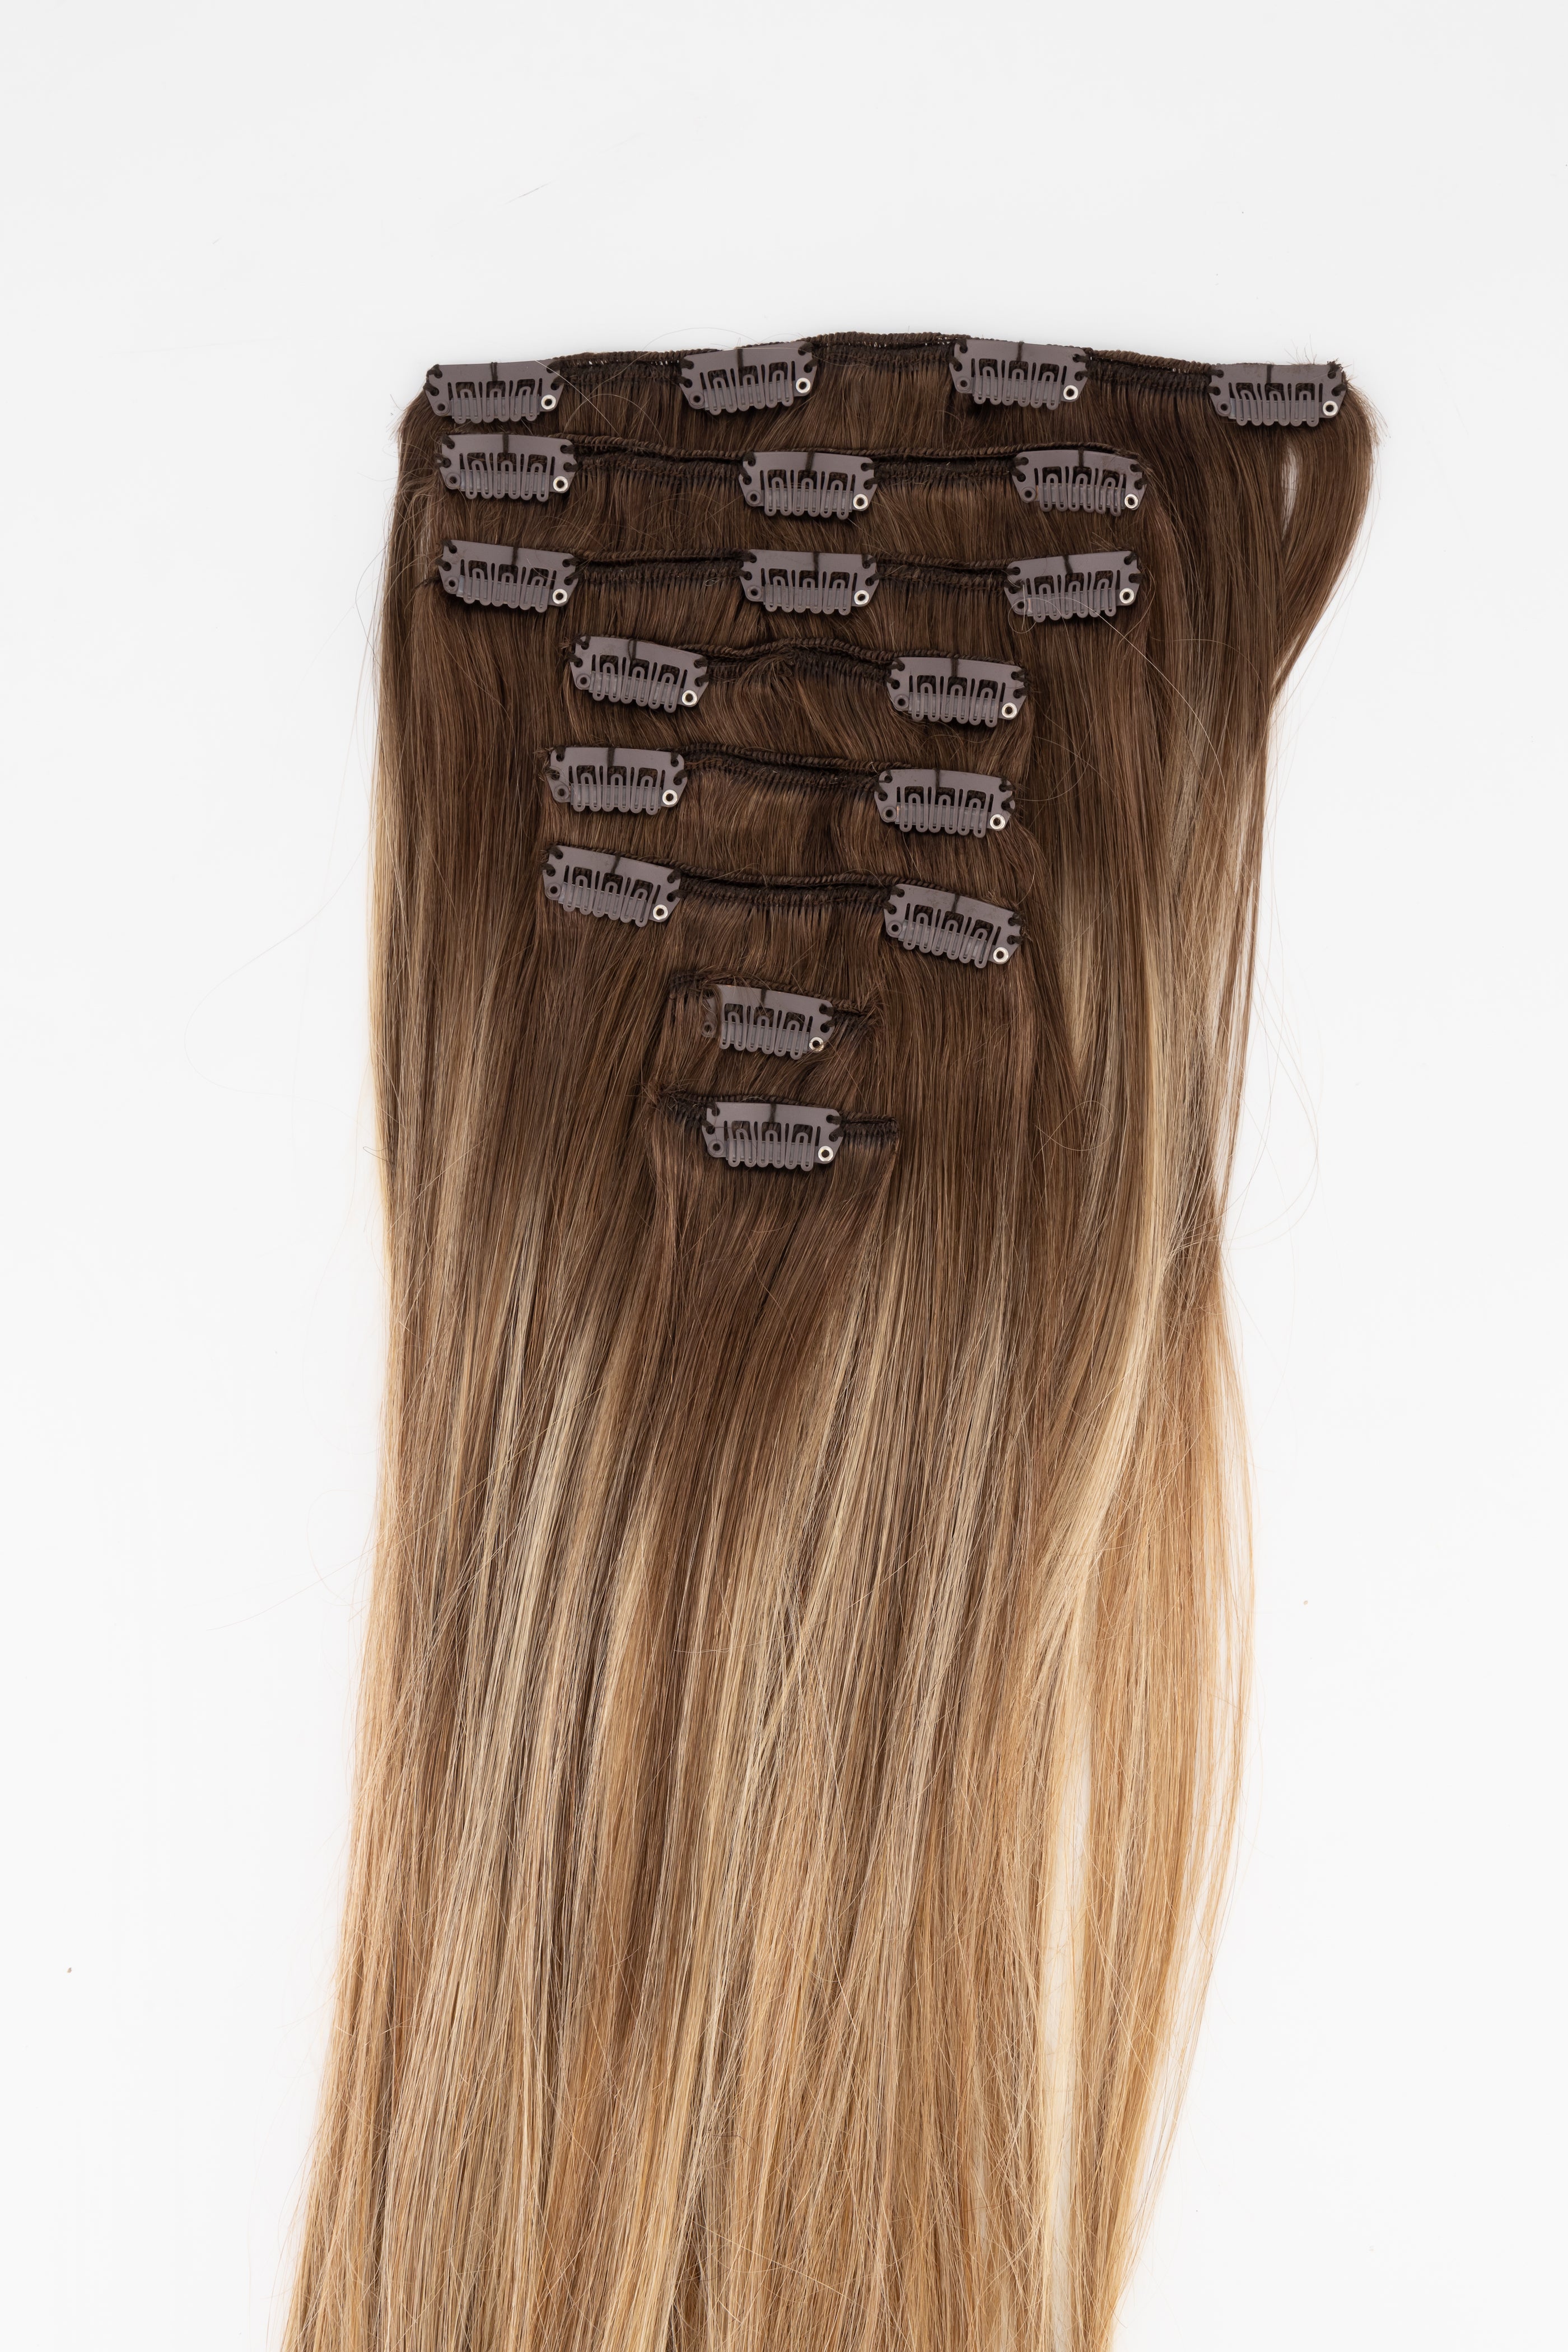 Frontrow clip in hair extensions in shade mixed toffee balayage